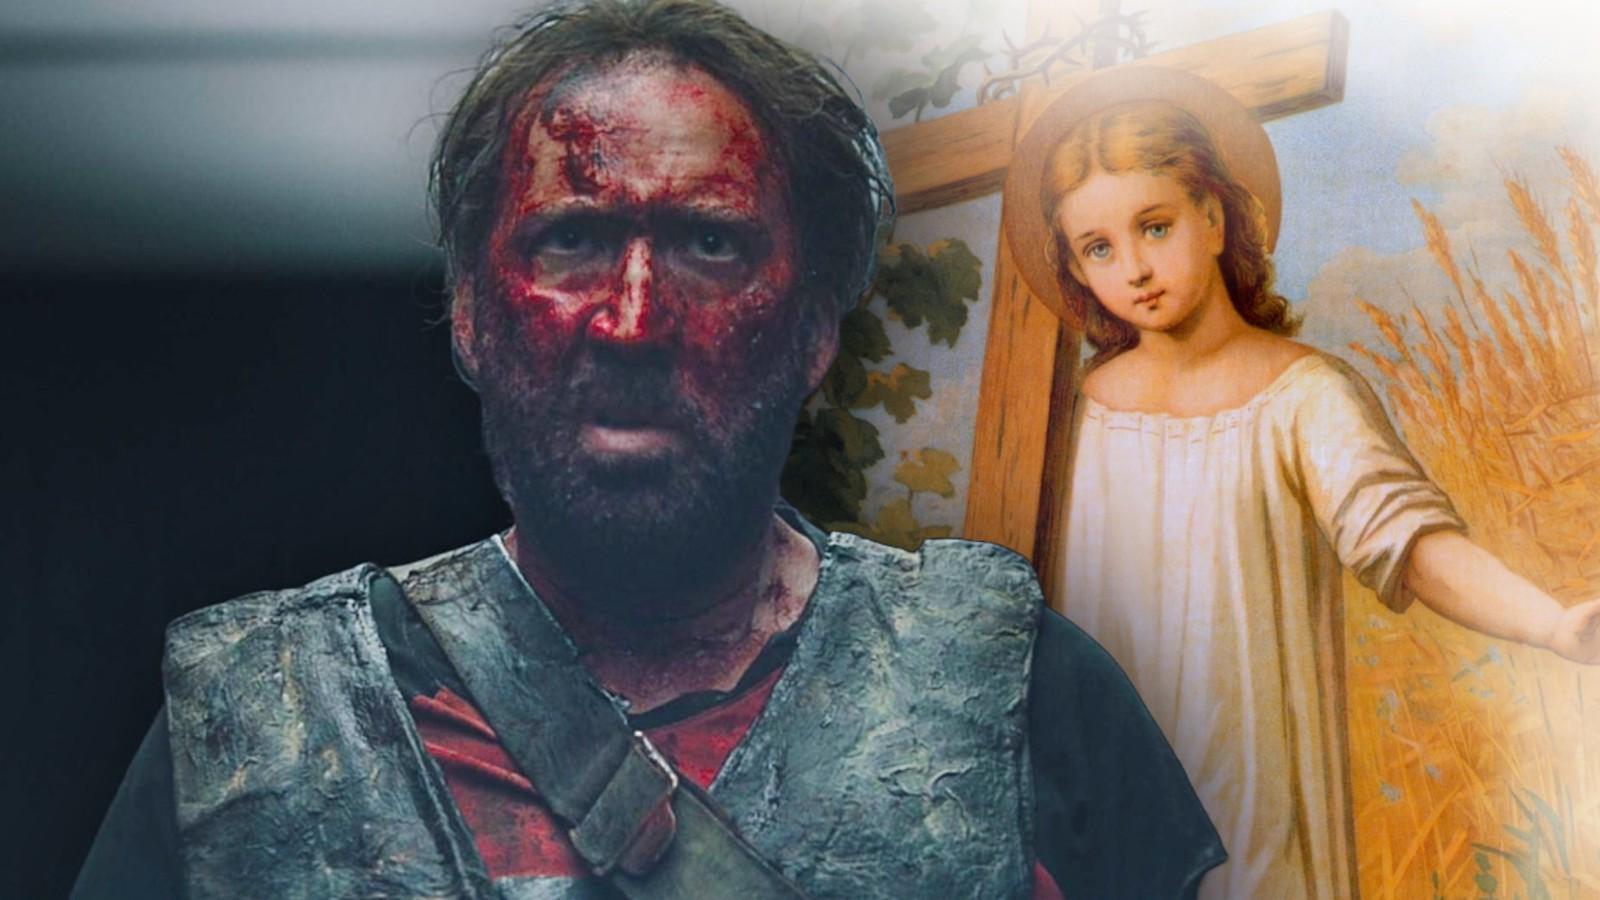 Nicolas Cage in Mandy and Jesus as a child